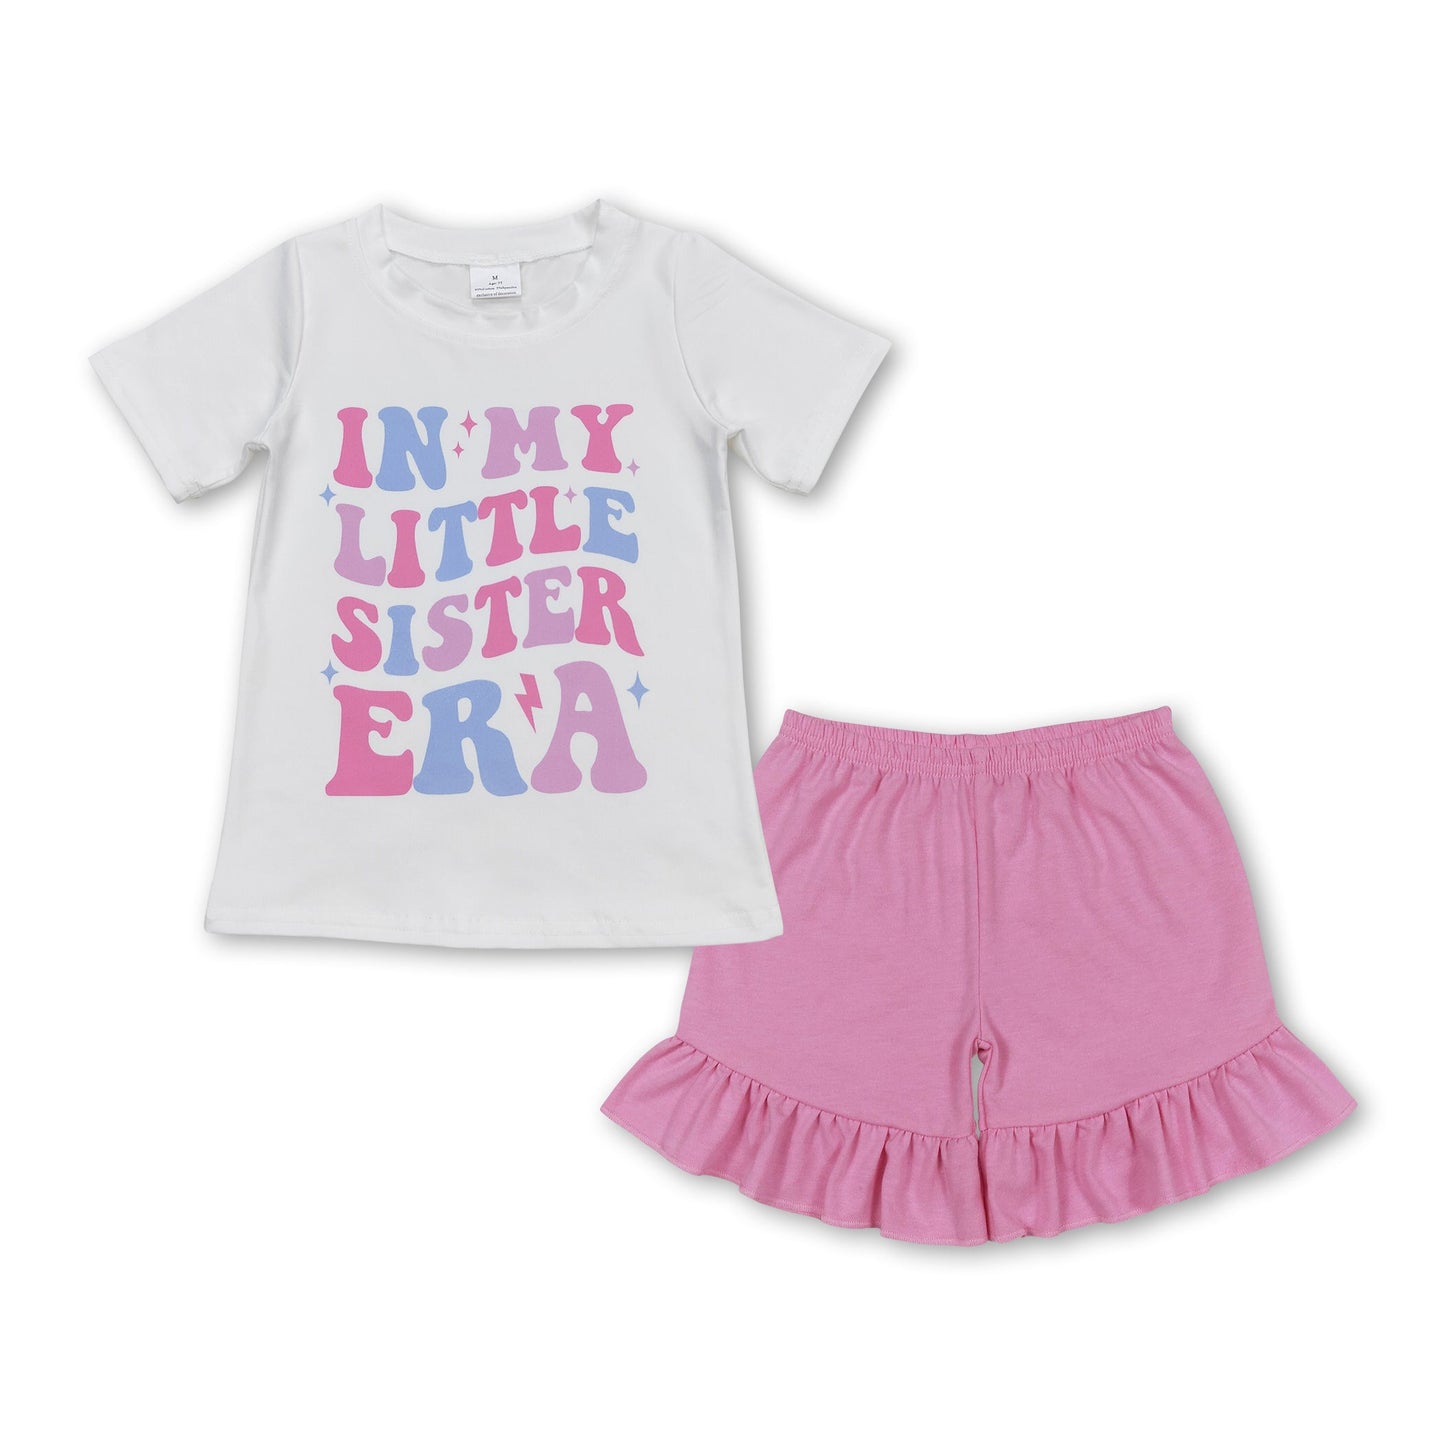 Little sister top pink ruffle cotton shorts singer girls clothing